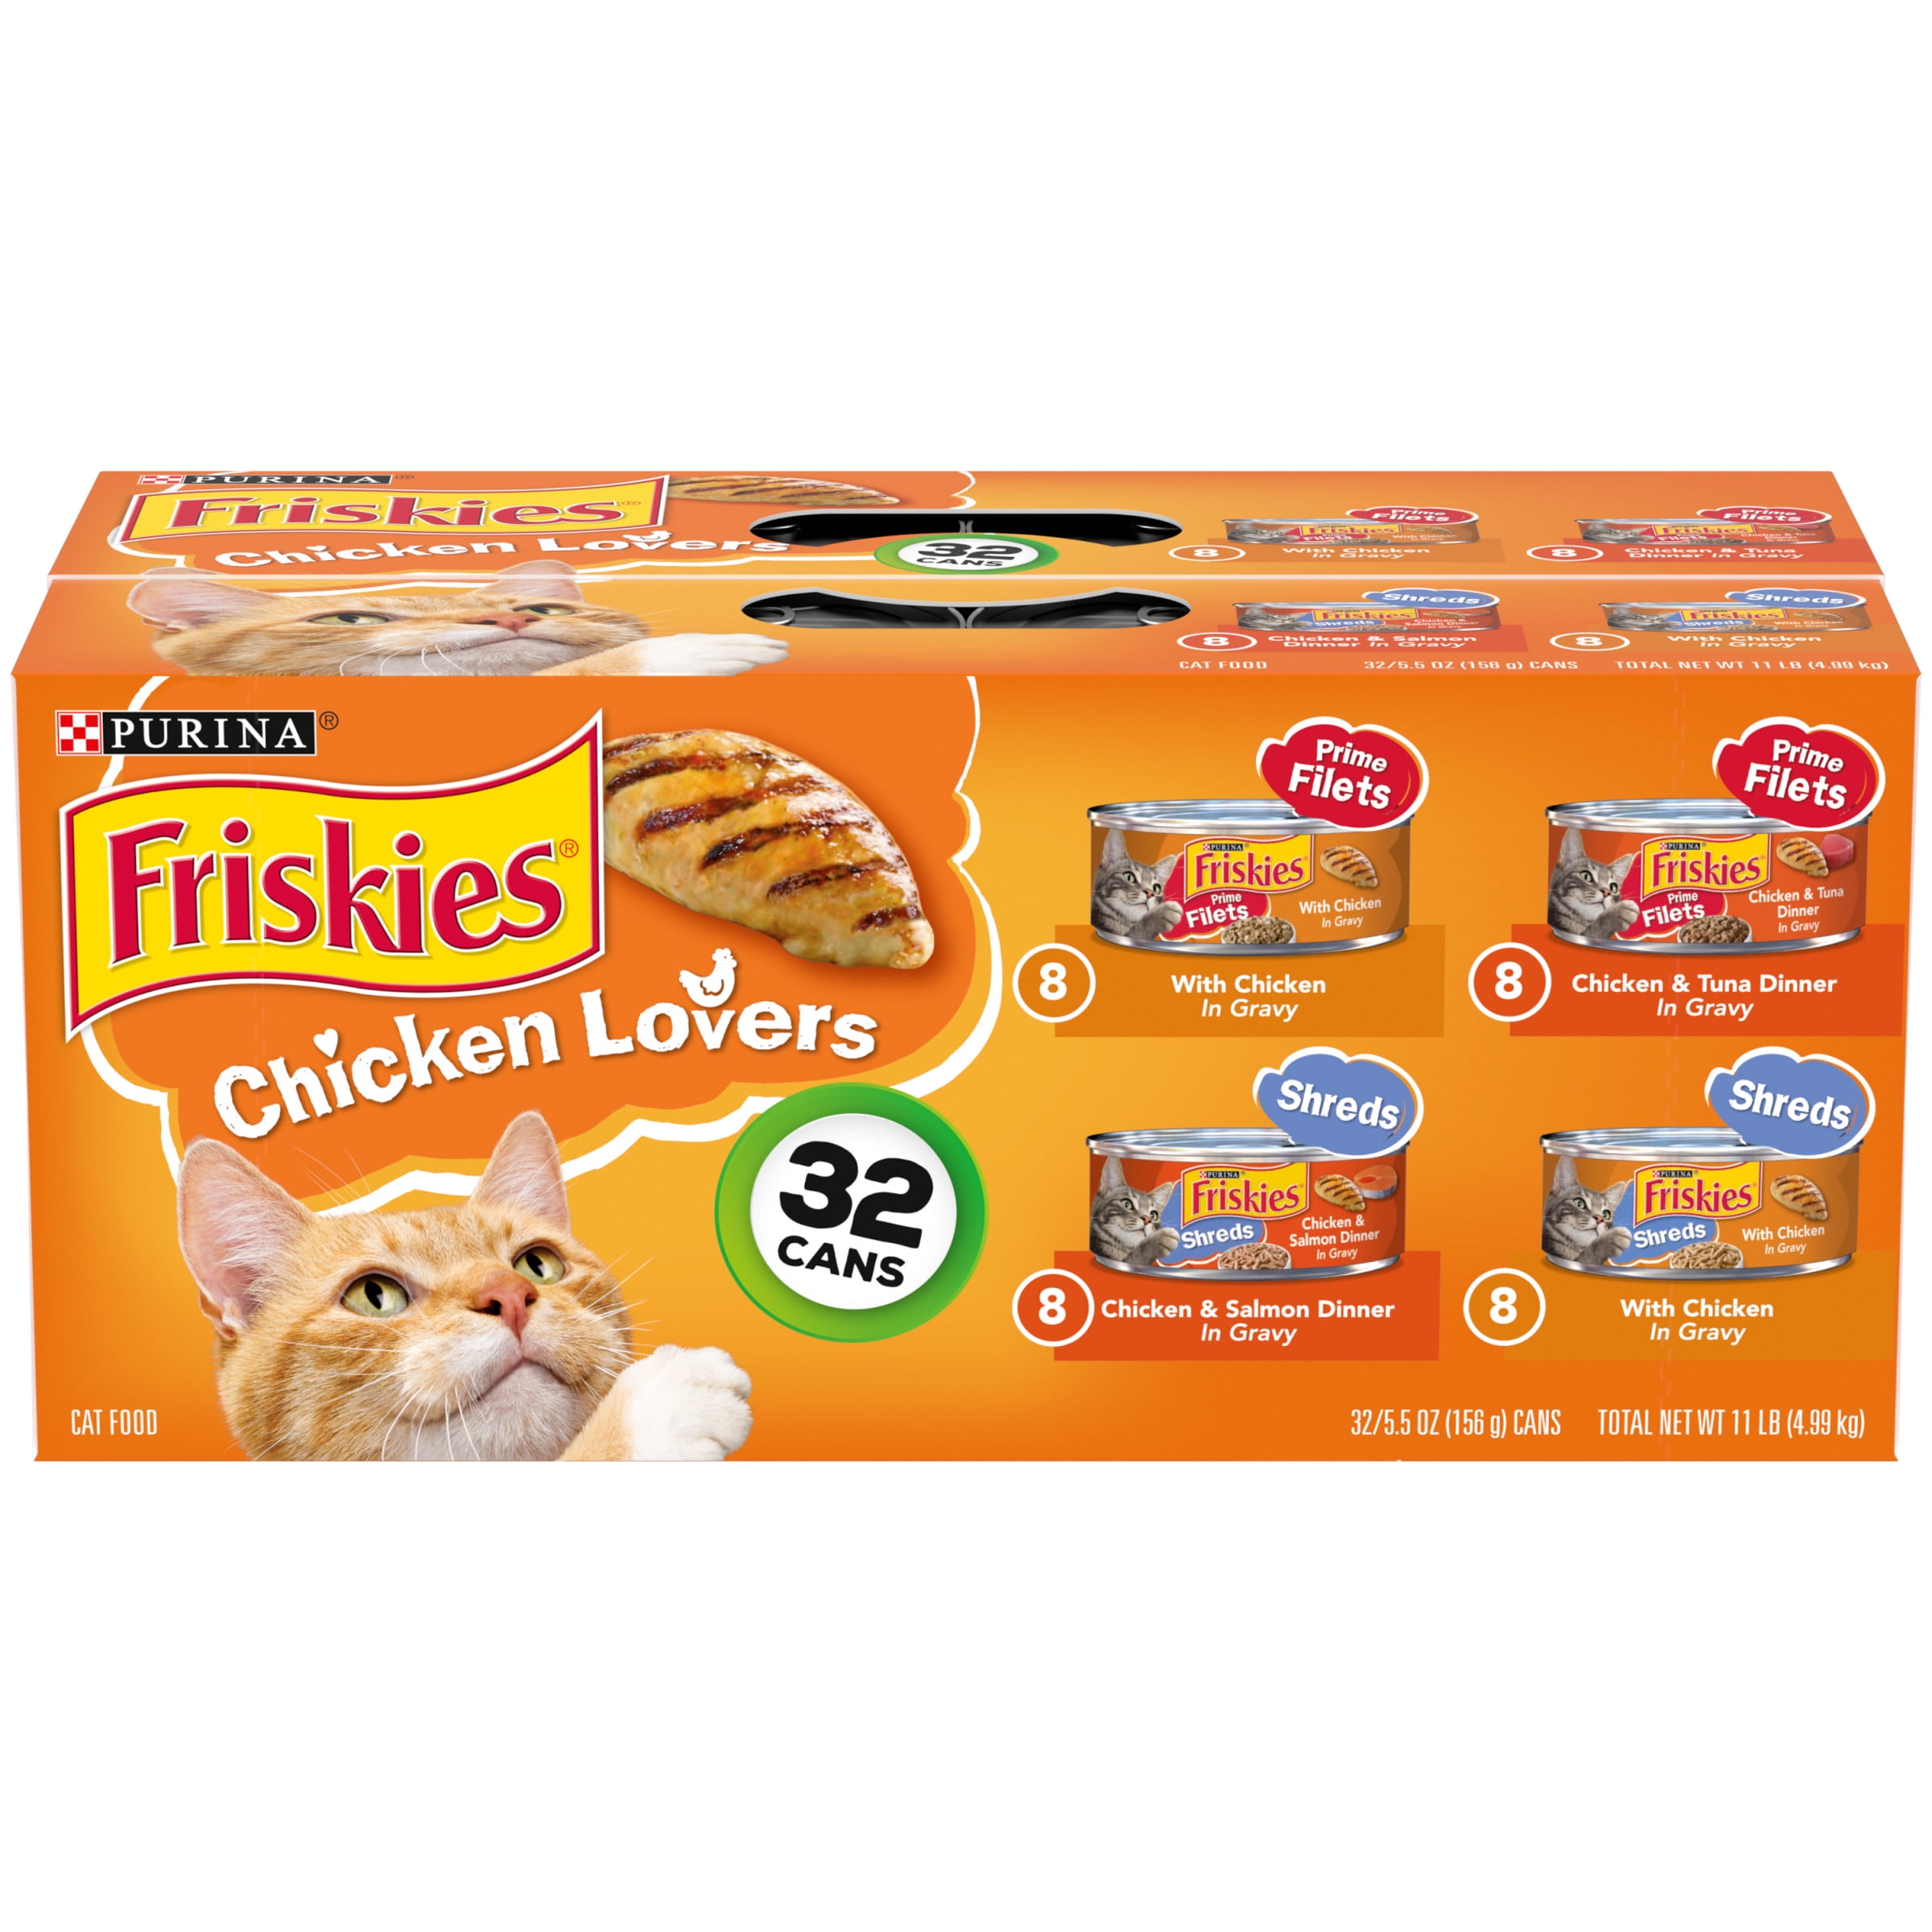 Purina Friskies Chicken Lovers Wet Cat Food Variety Pack, 5.5 oz Cans (32 Pack)